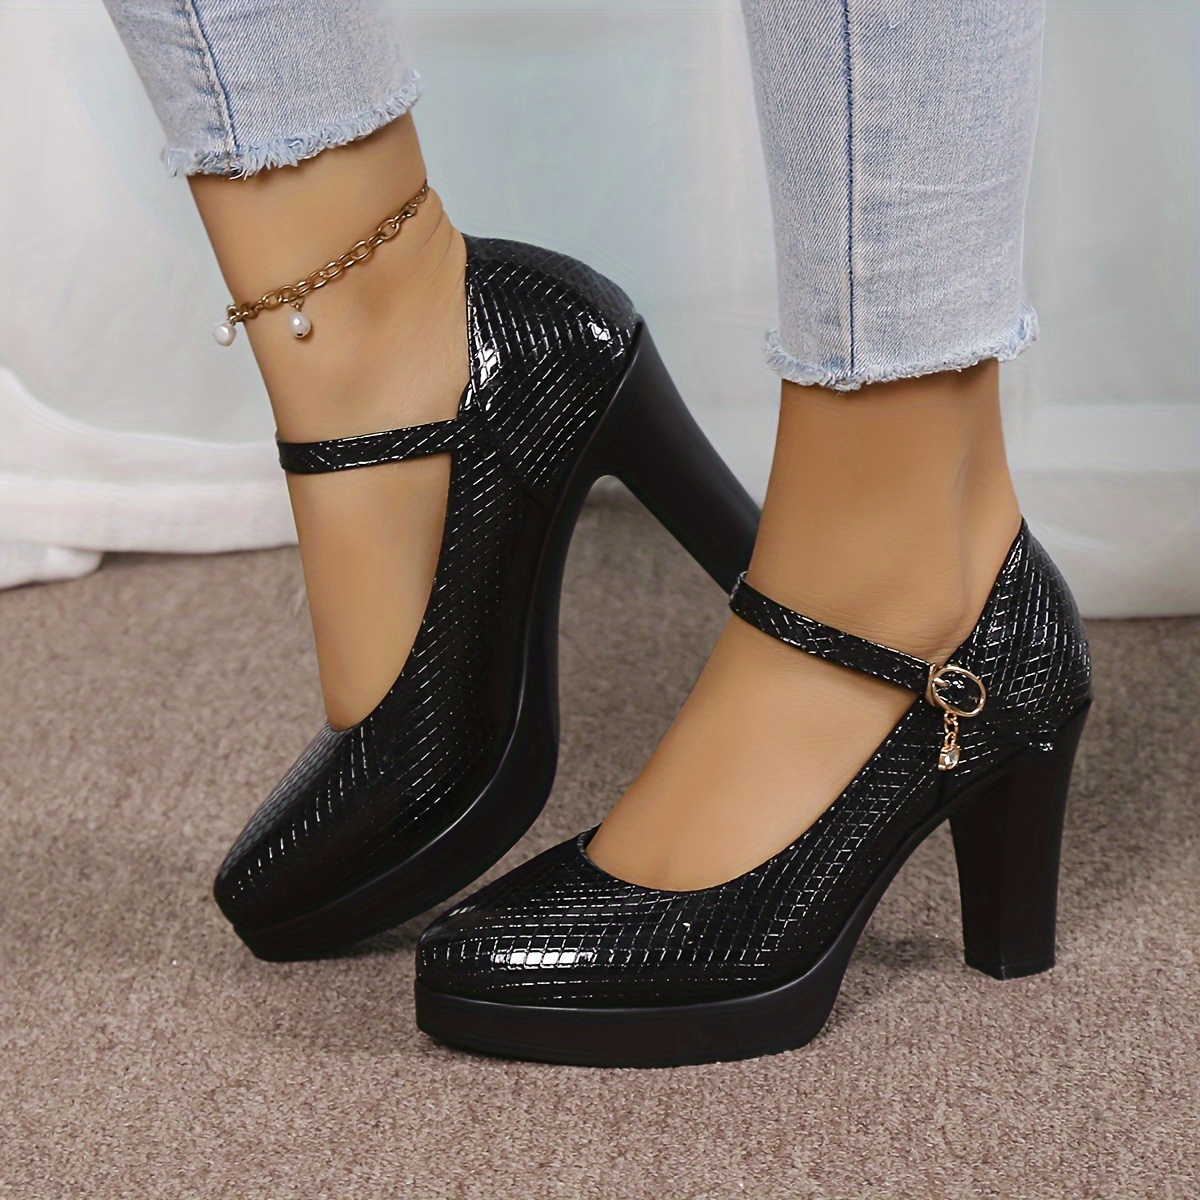 Women High Heels Stiletto Pumps Shoes Platform Ankle Strap Party Mary Jane  Shoes